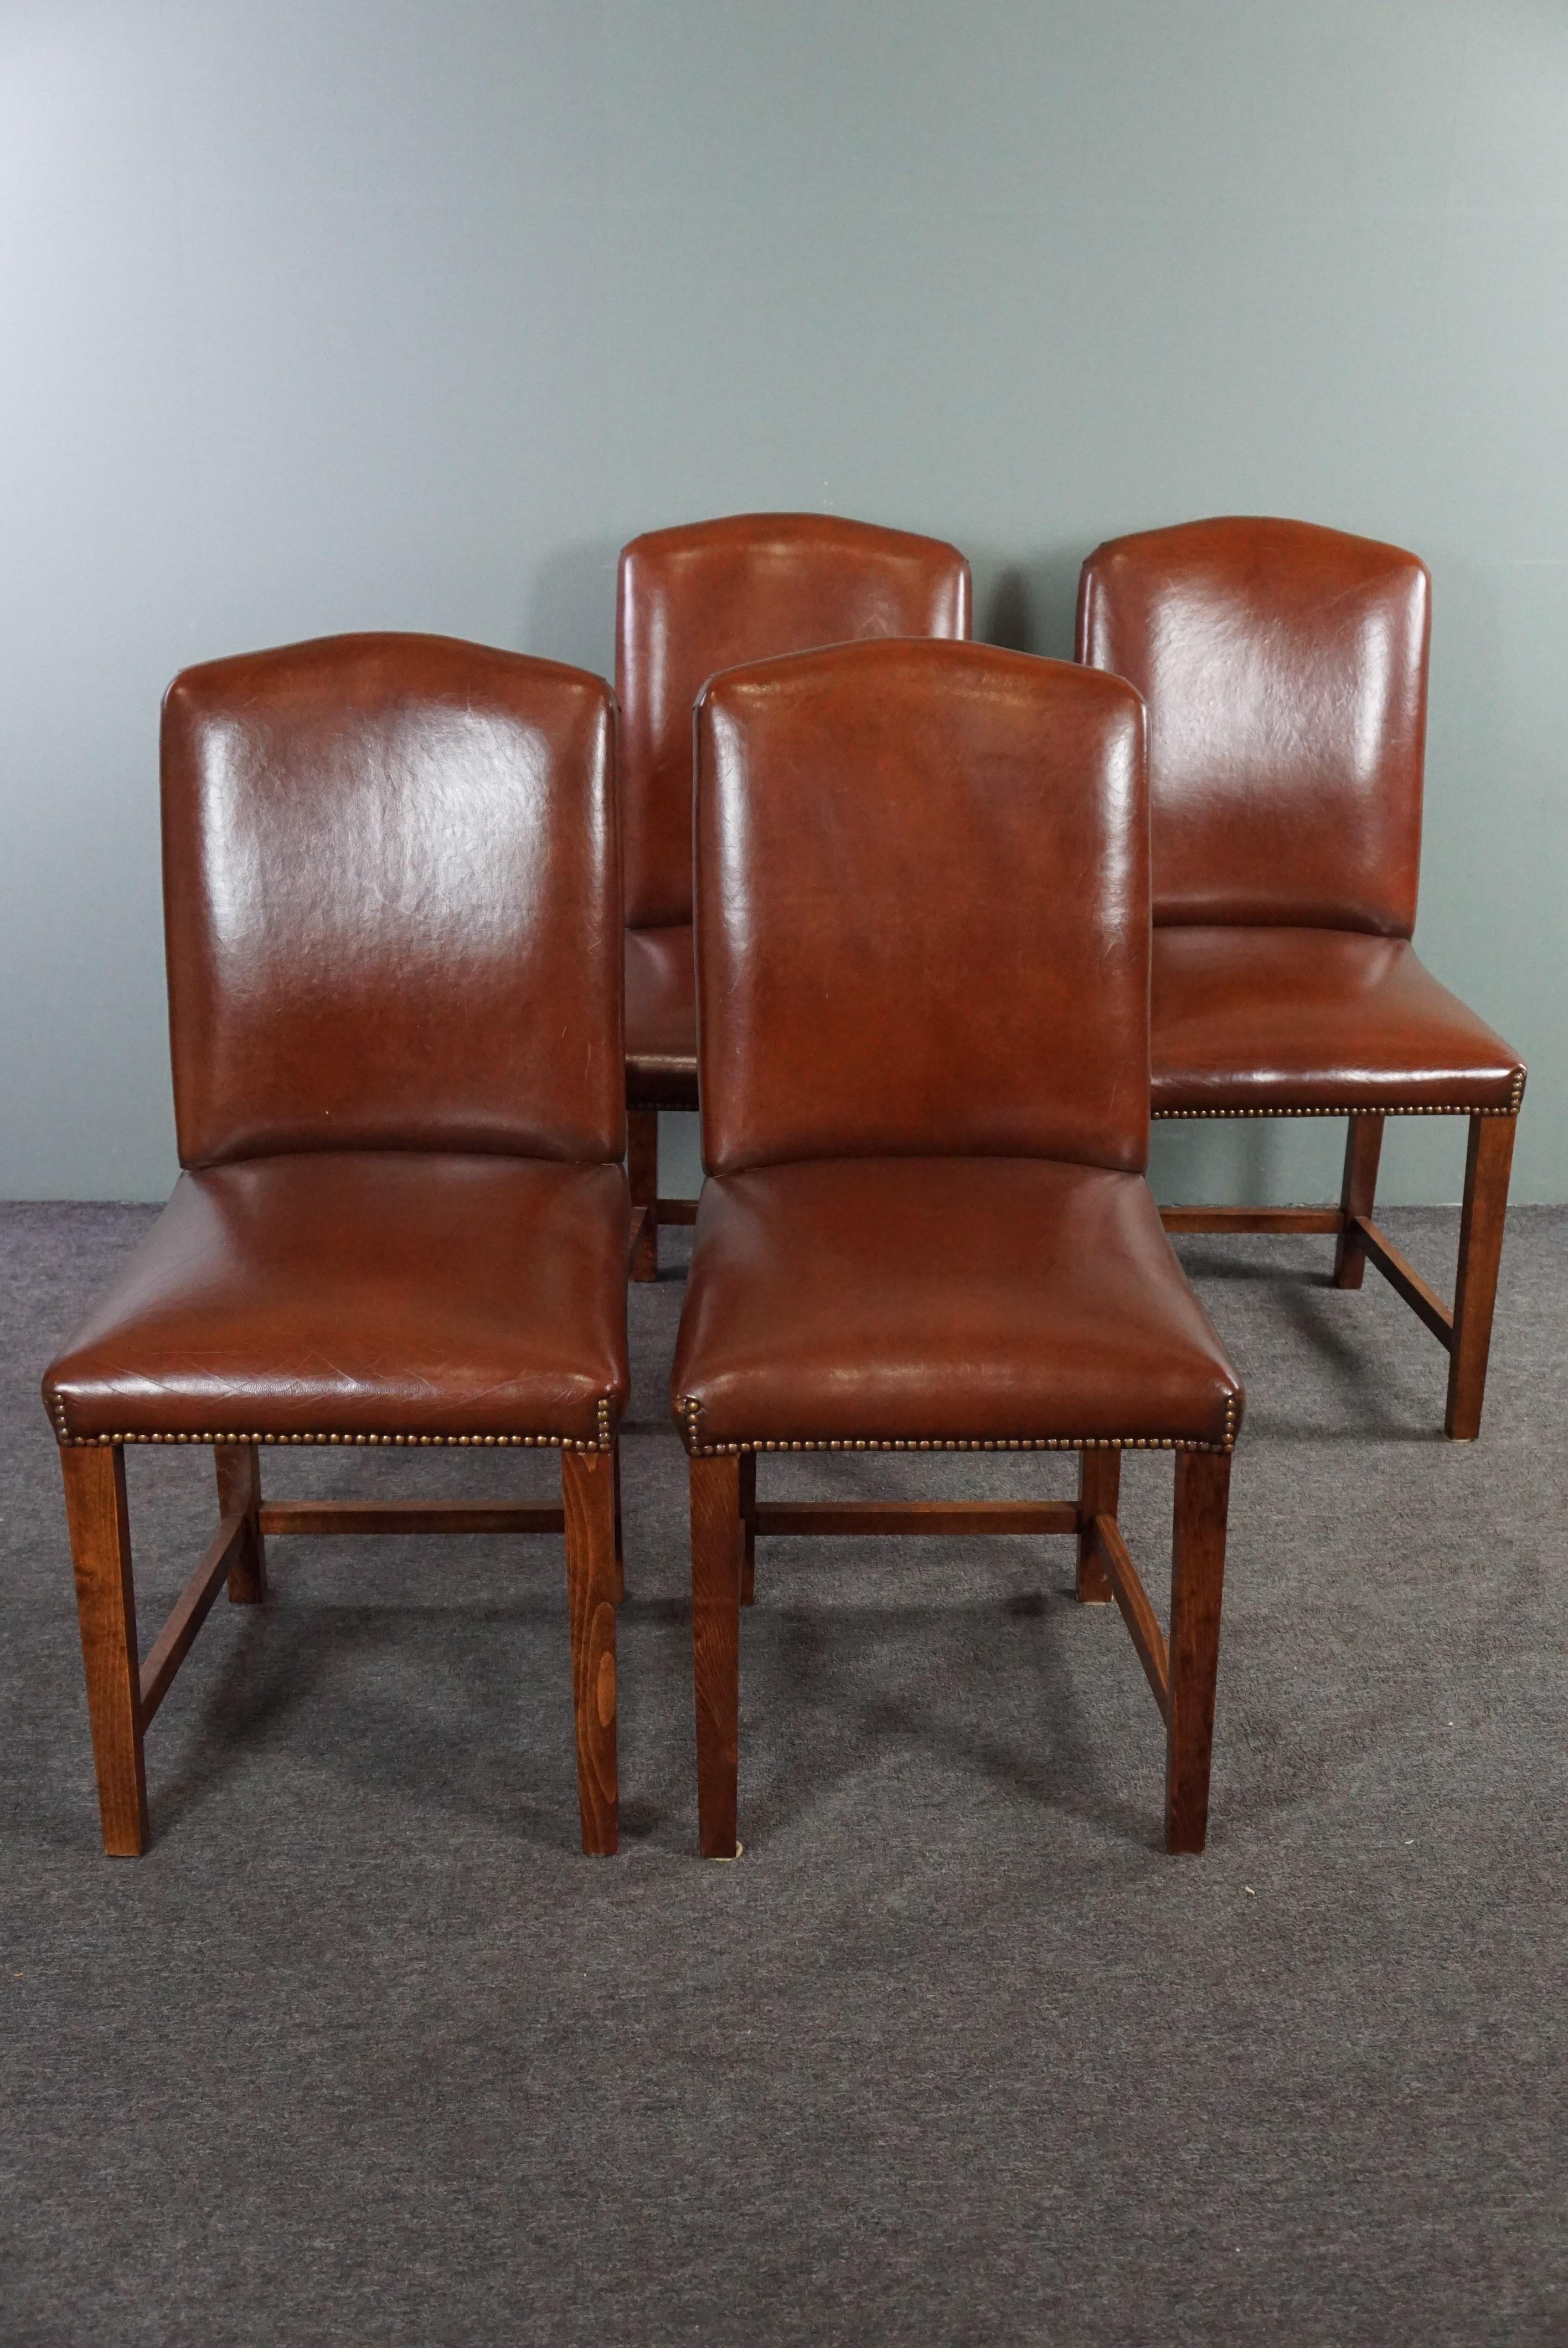 Offered is this subtle set of 4 beautiful classic dining room chairs finished with decorative nails.

This very good quality and solid set of 4 dining room chairs have a calm and sleek design, good seating comfort and a beautiful sheep leather seat